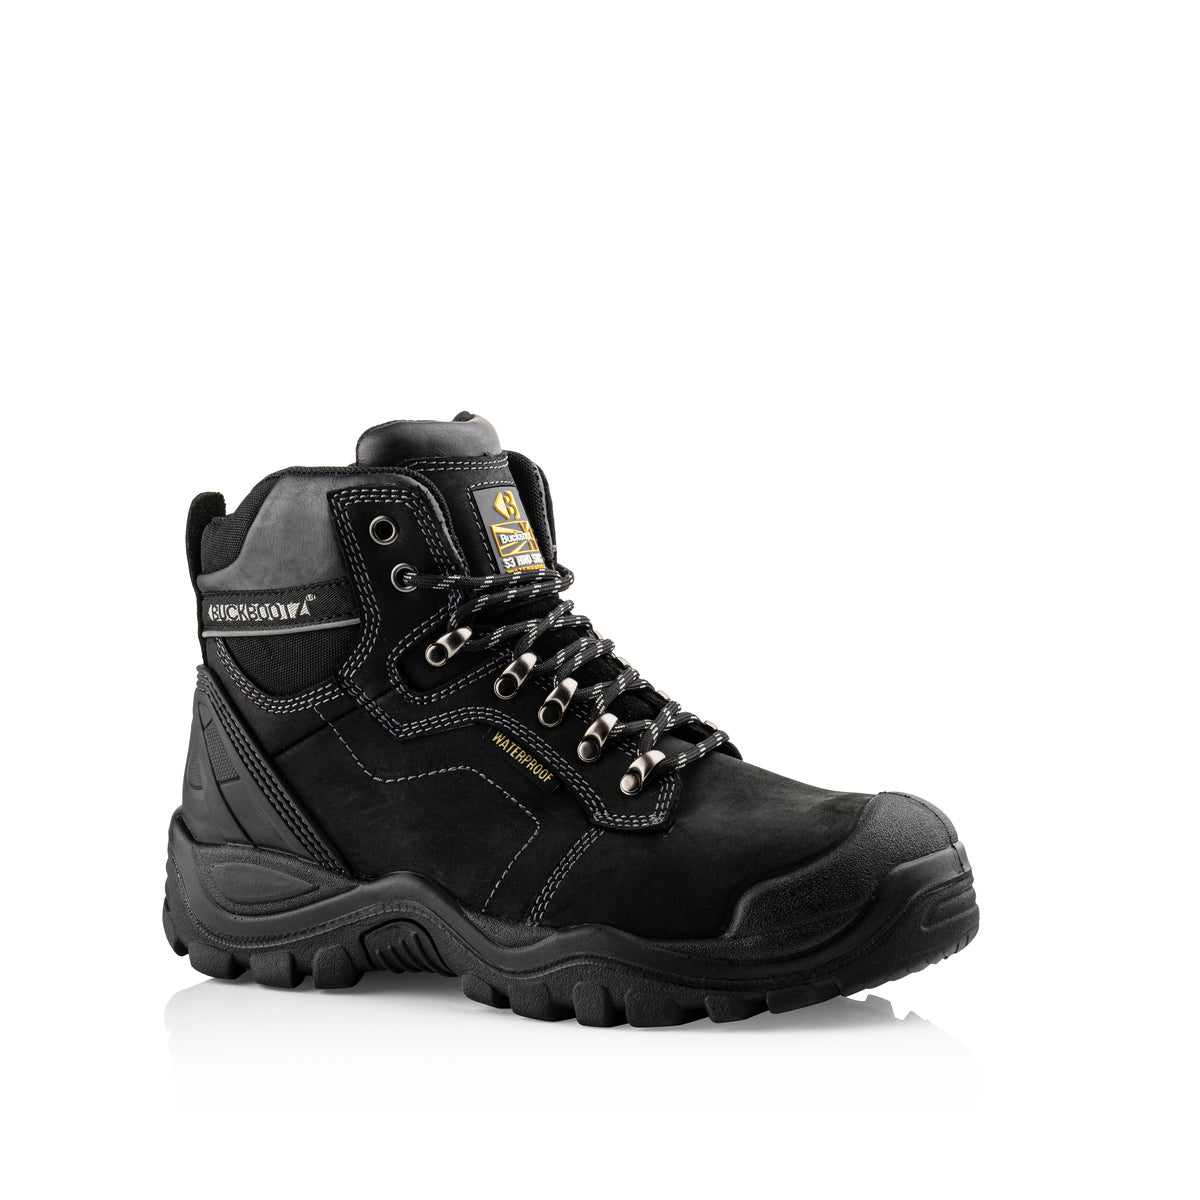 BSH009 Hiker Style Waterproof Lace-Up Safety Boot